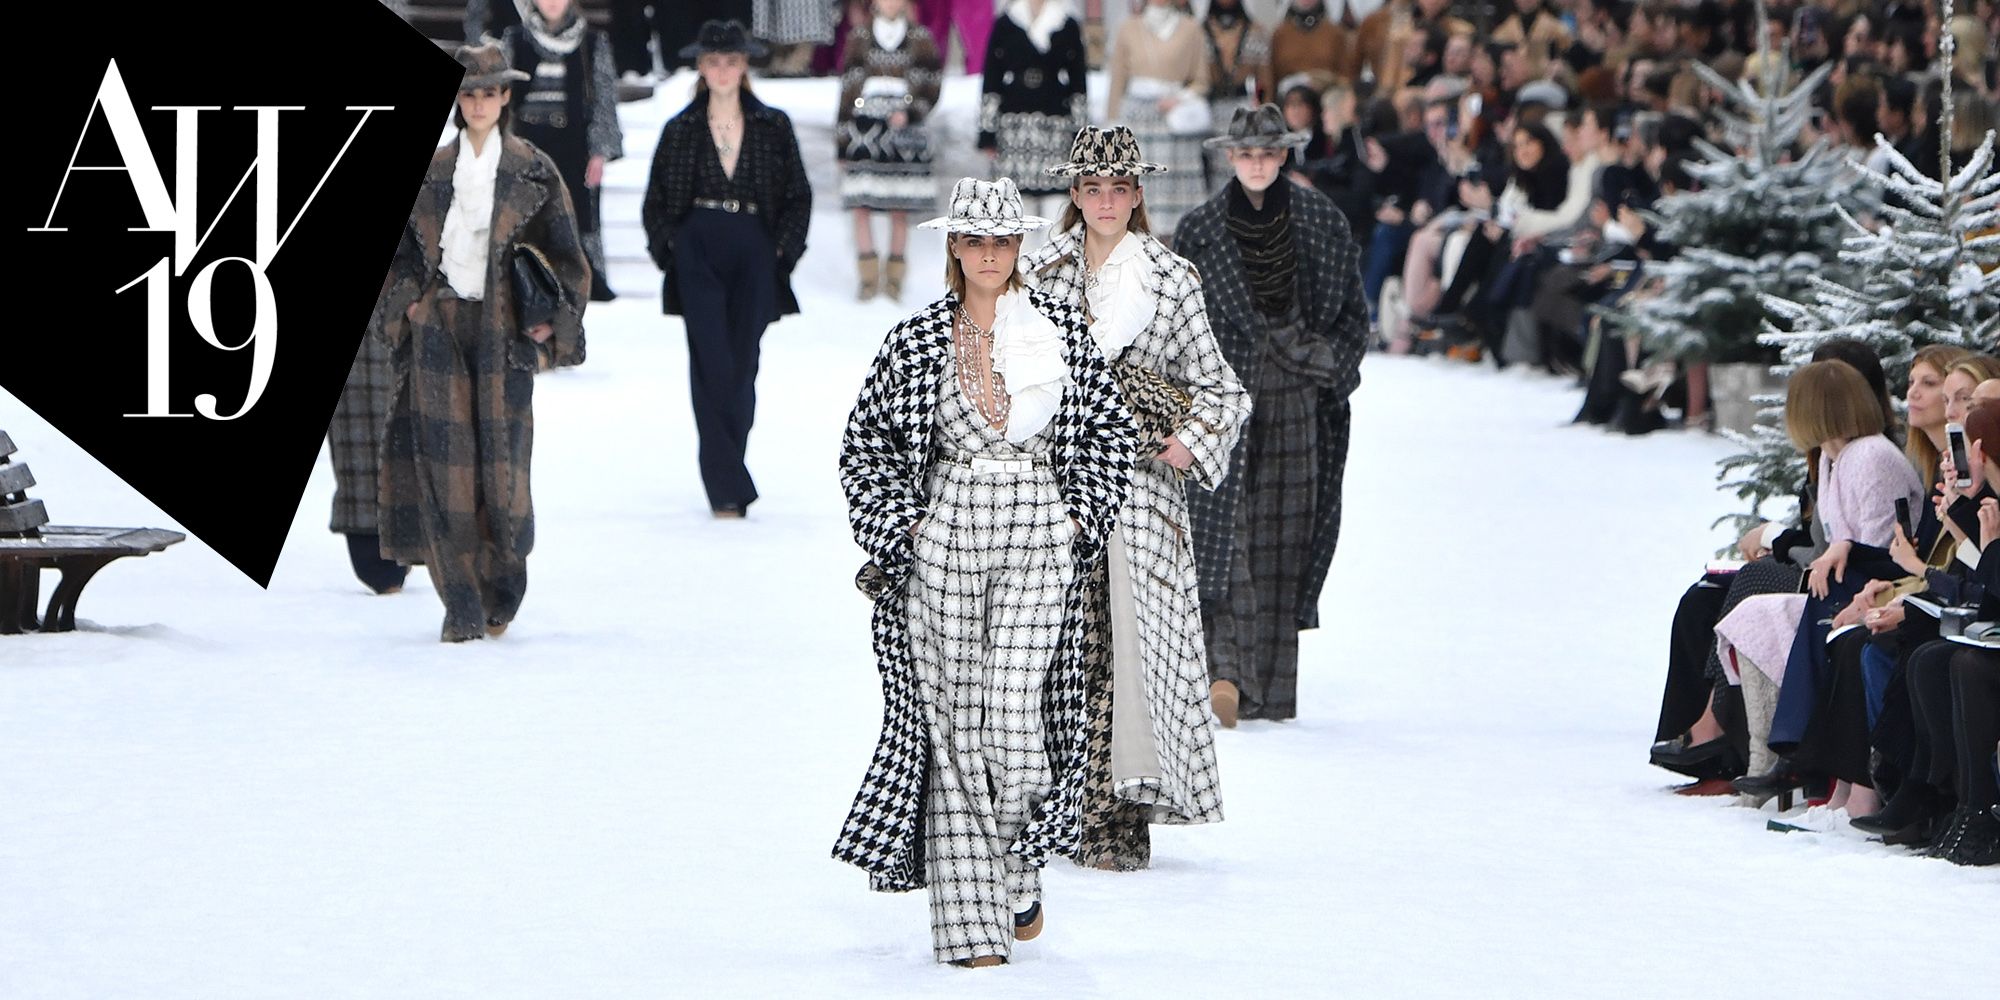 Paris Fashion Week 2015: Chanel works its magic in Karl Lagerfeld hothouse, The Independent